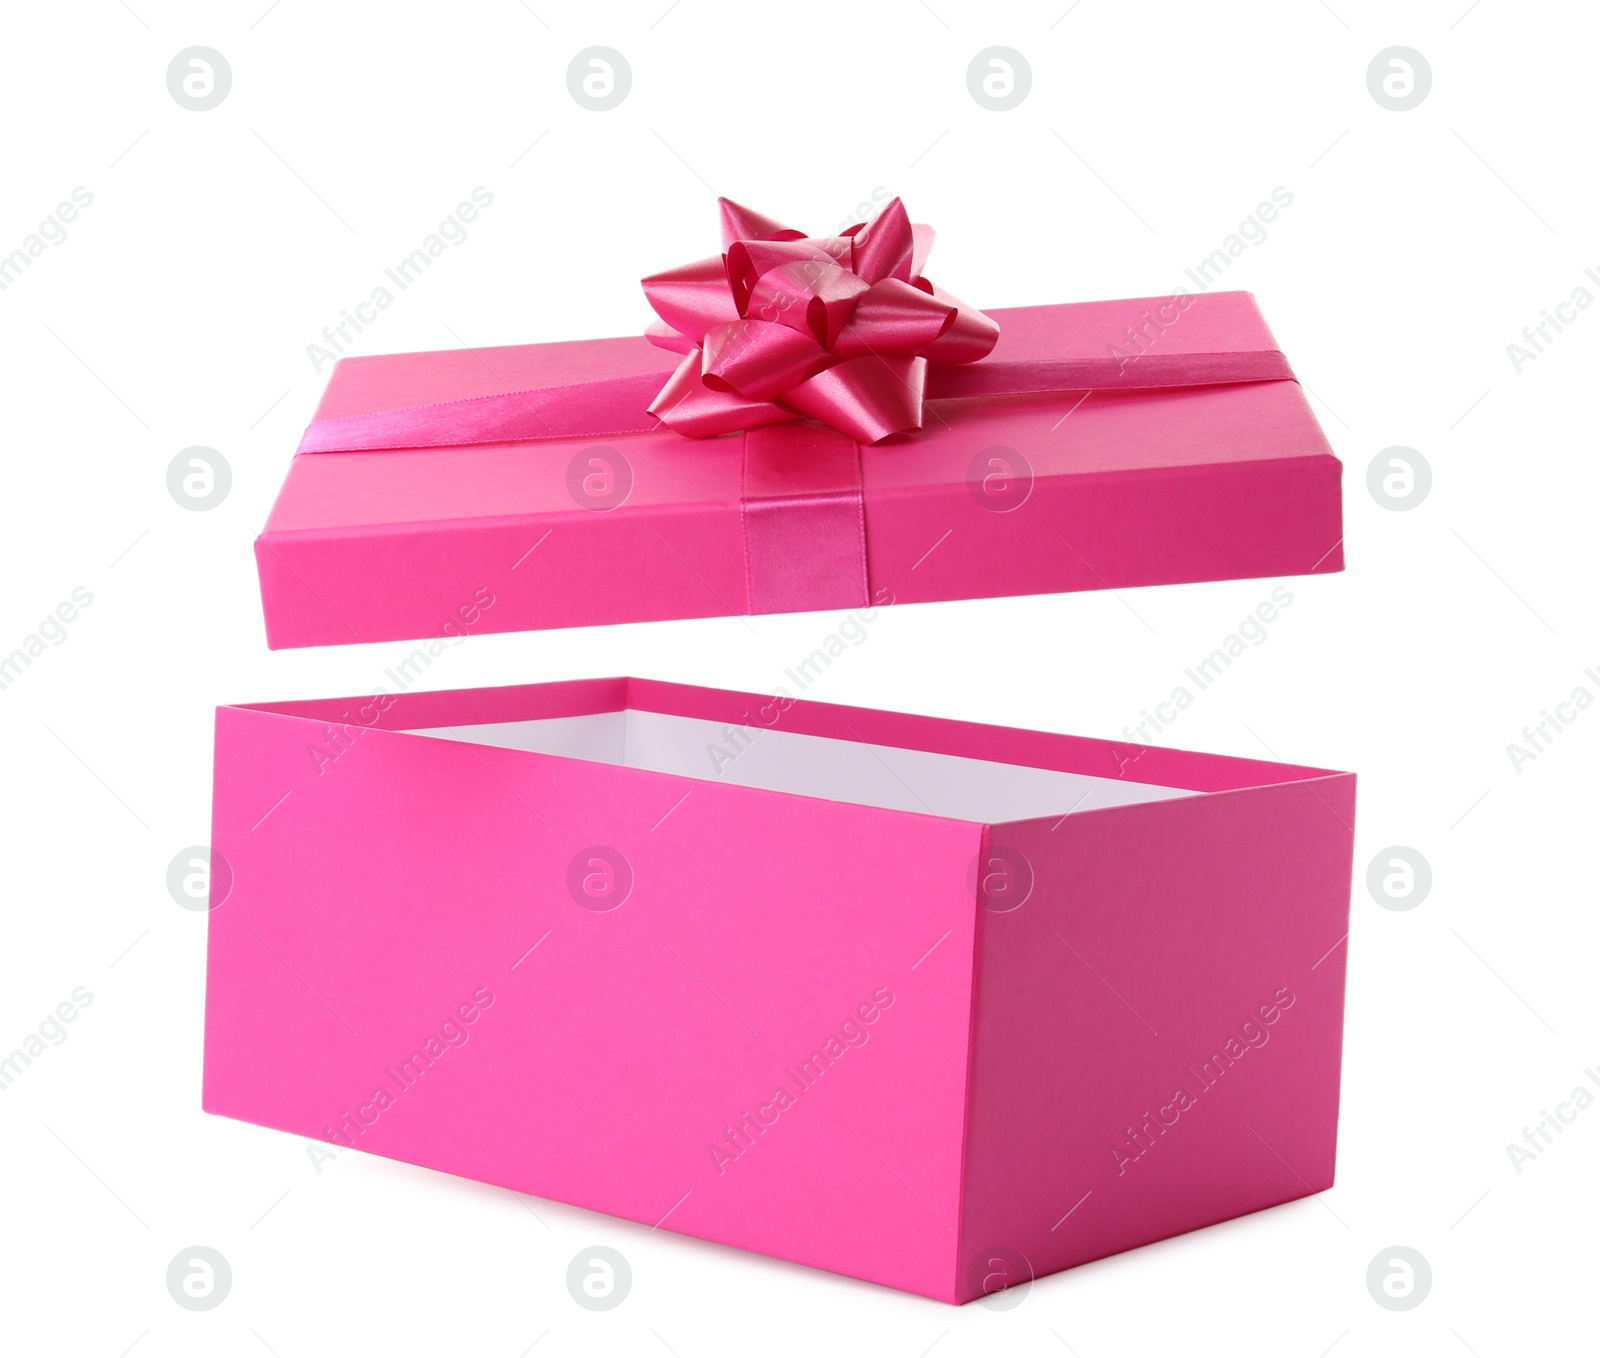 Photo of Pink gift box and lid with bow on white background